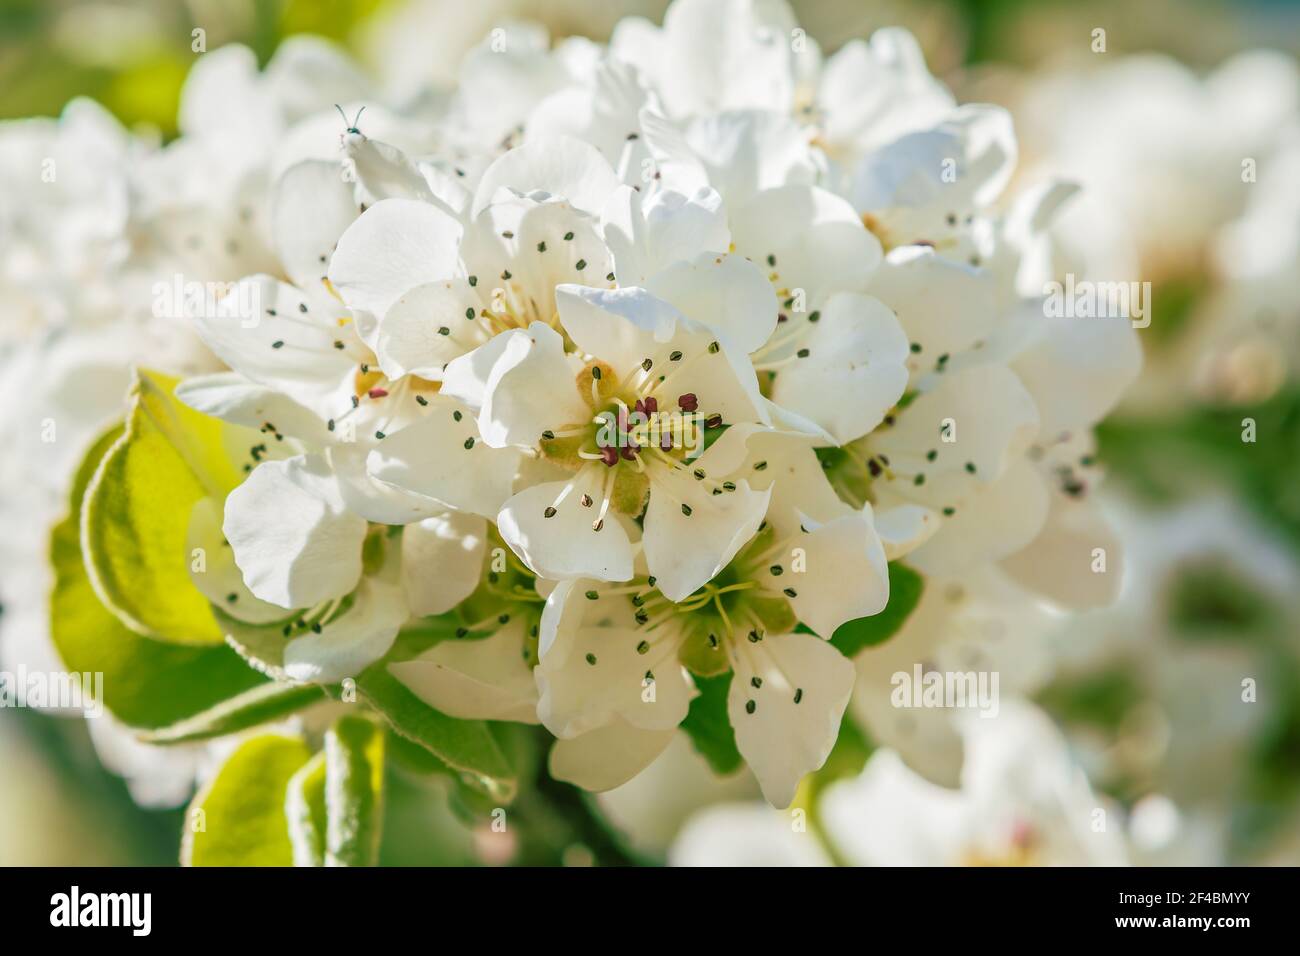 Branch of a fruit tree in spring. Many white opened flowers of an apple tree in sunshine. Central view of an open apple blossom. Flower stems, petals, Stock Photo